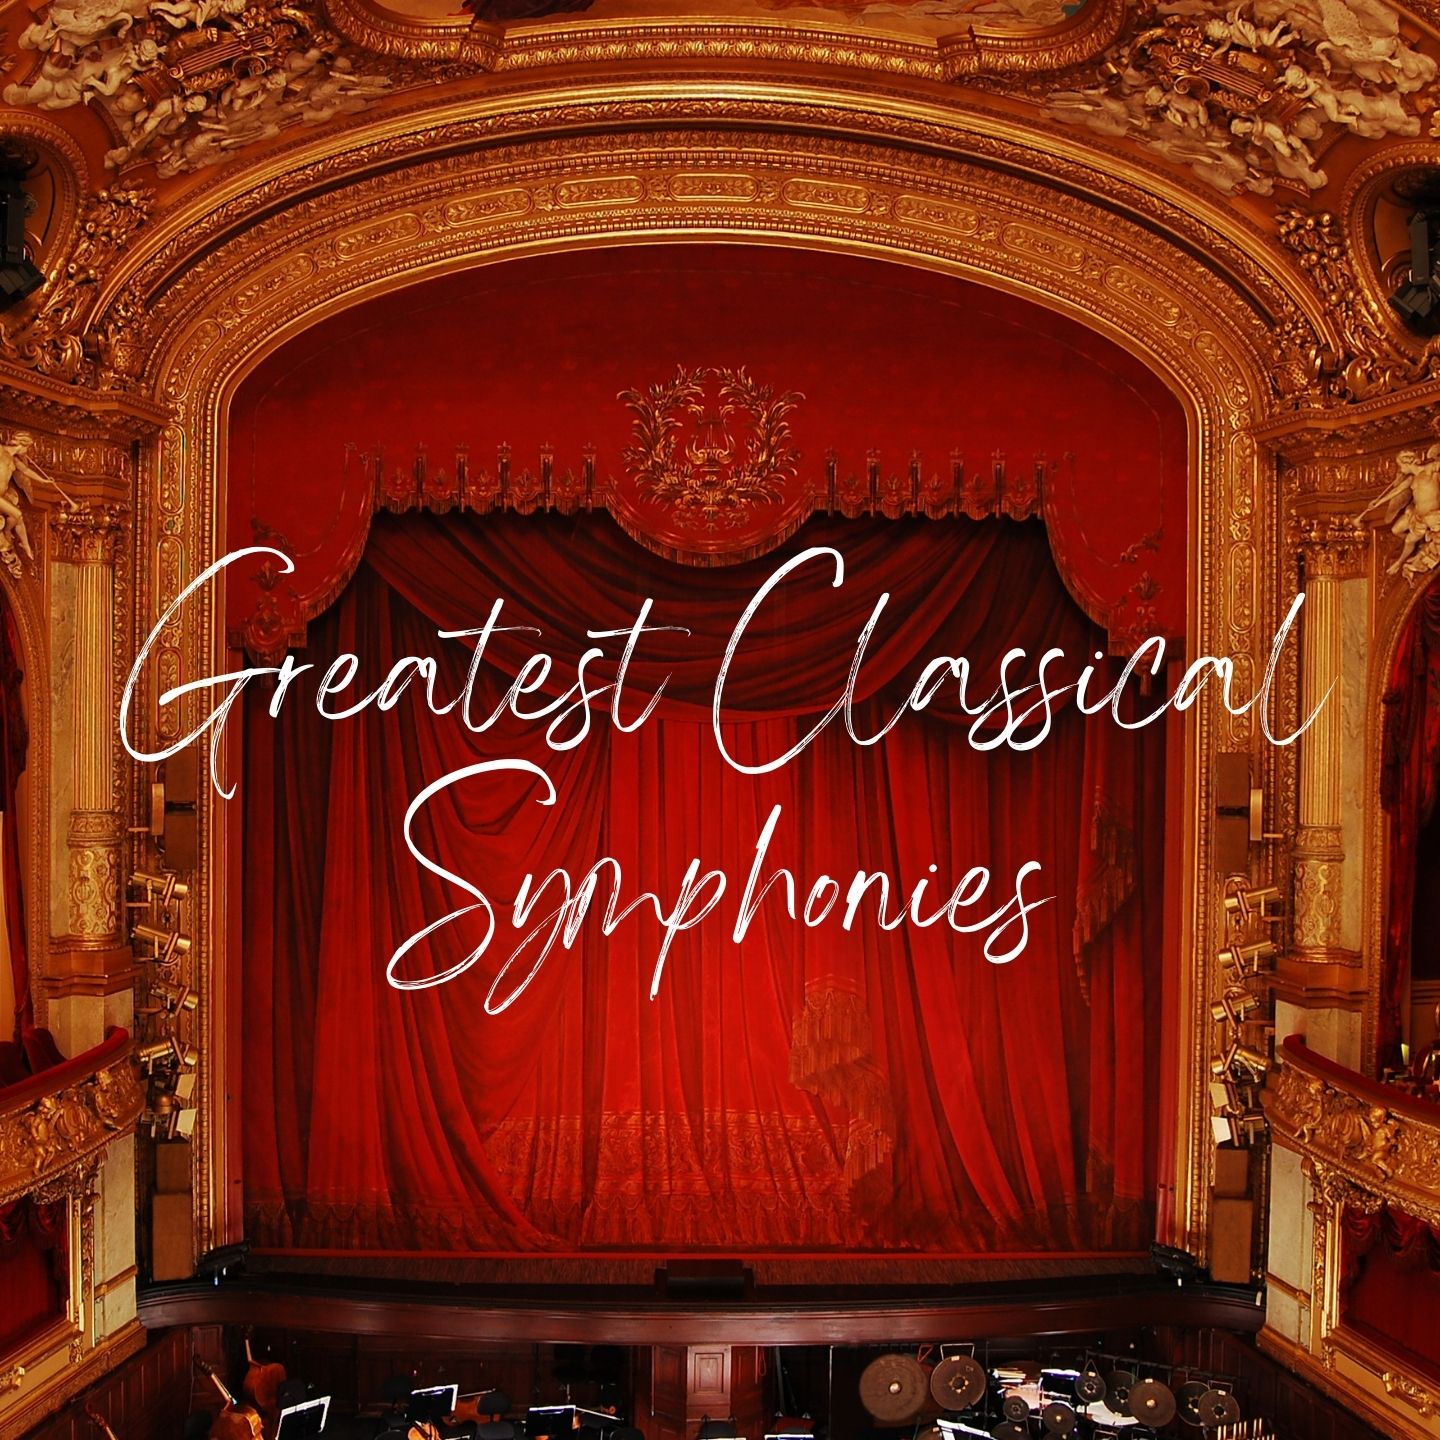 20 Greatest Classical Music Symphonies